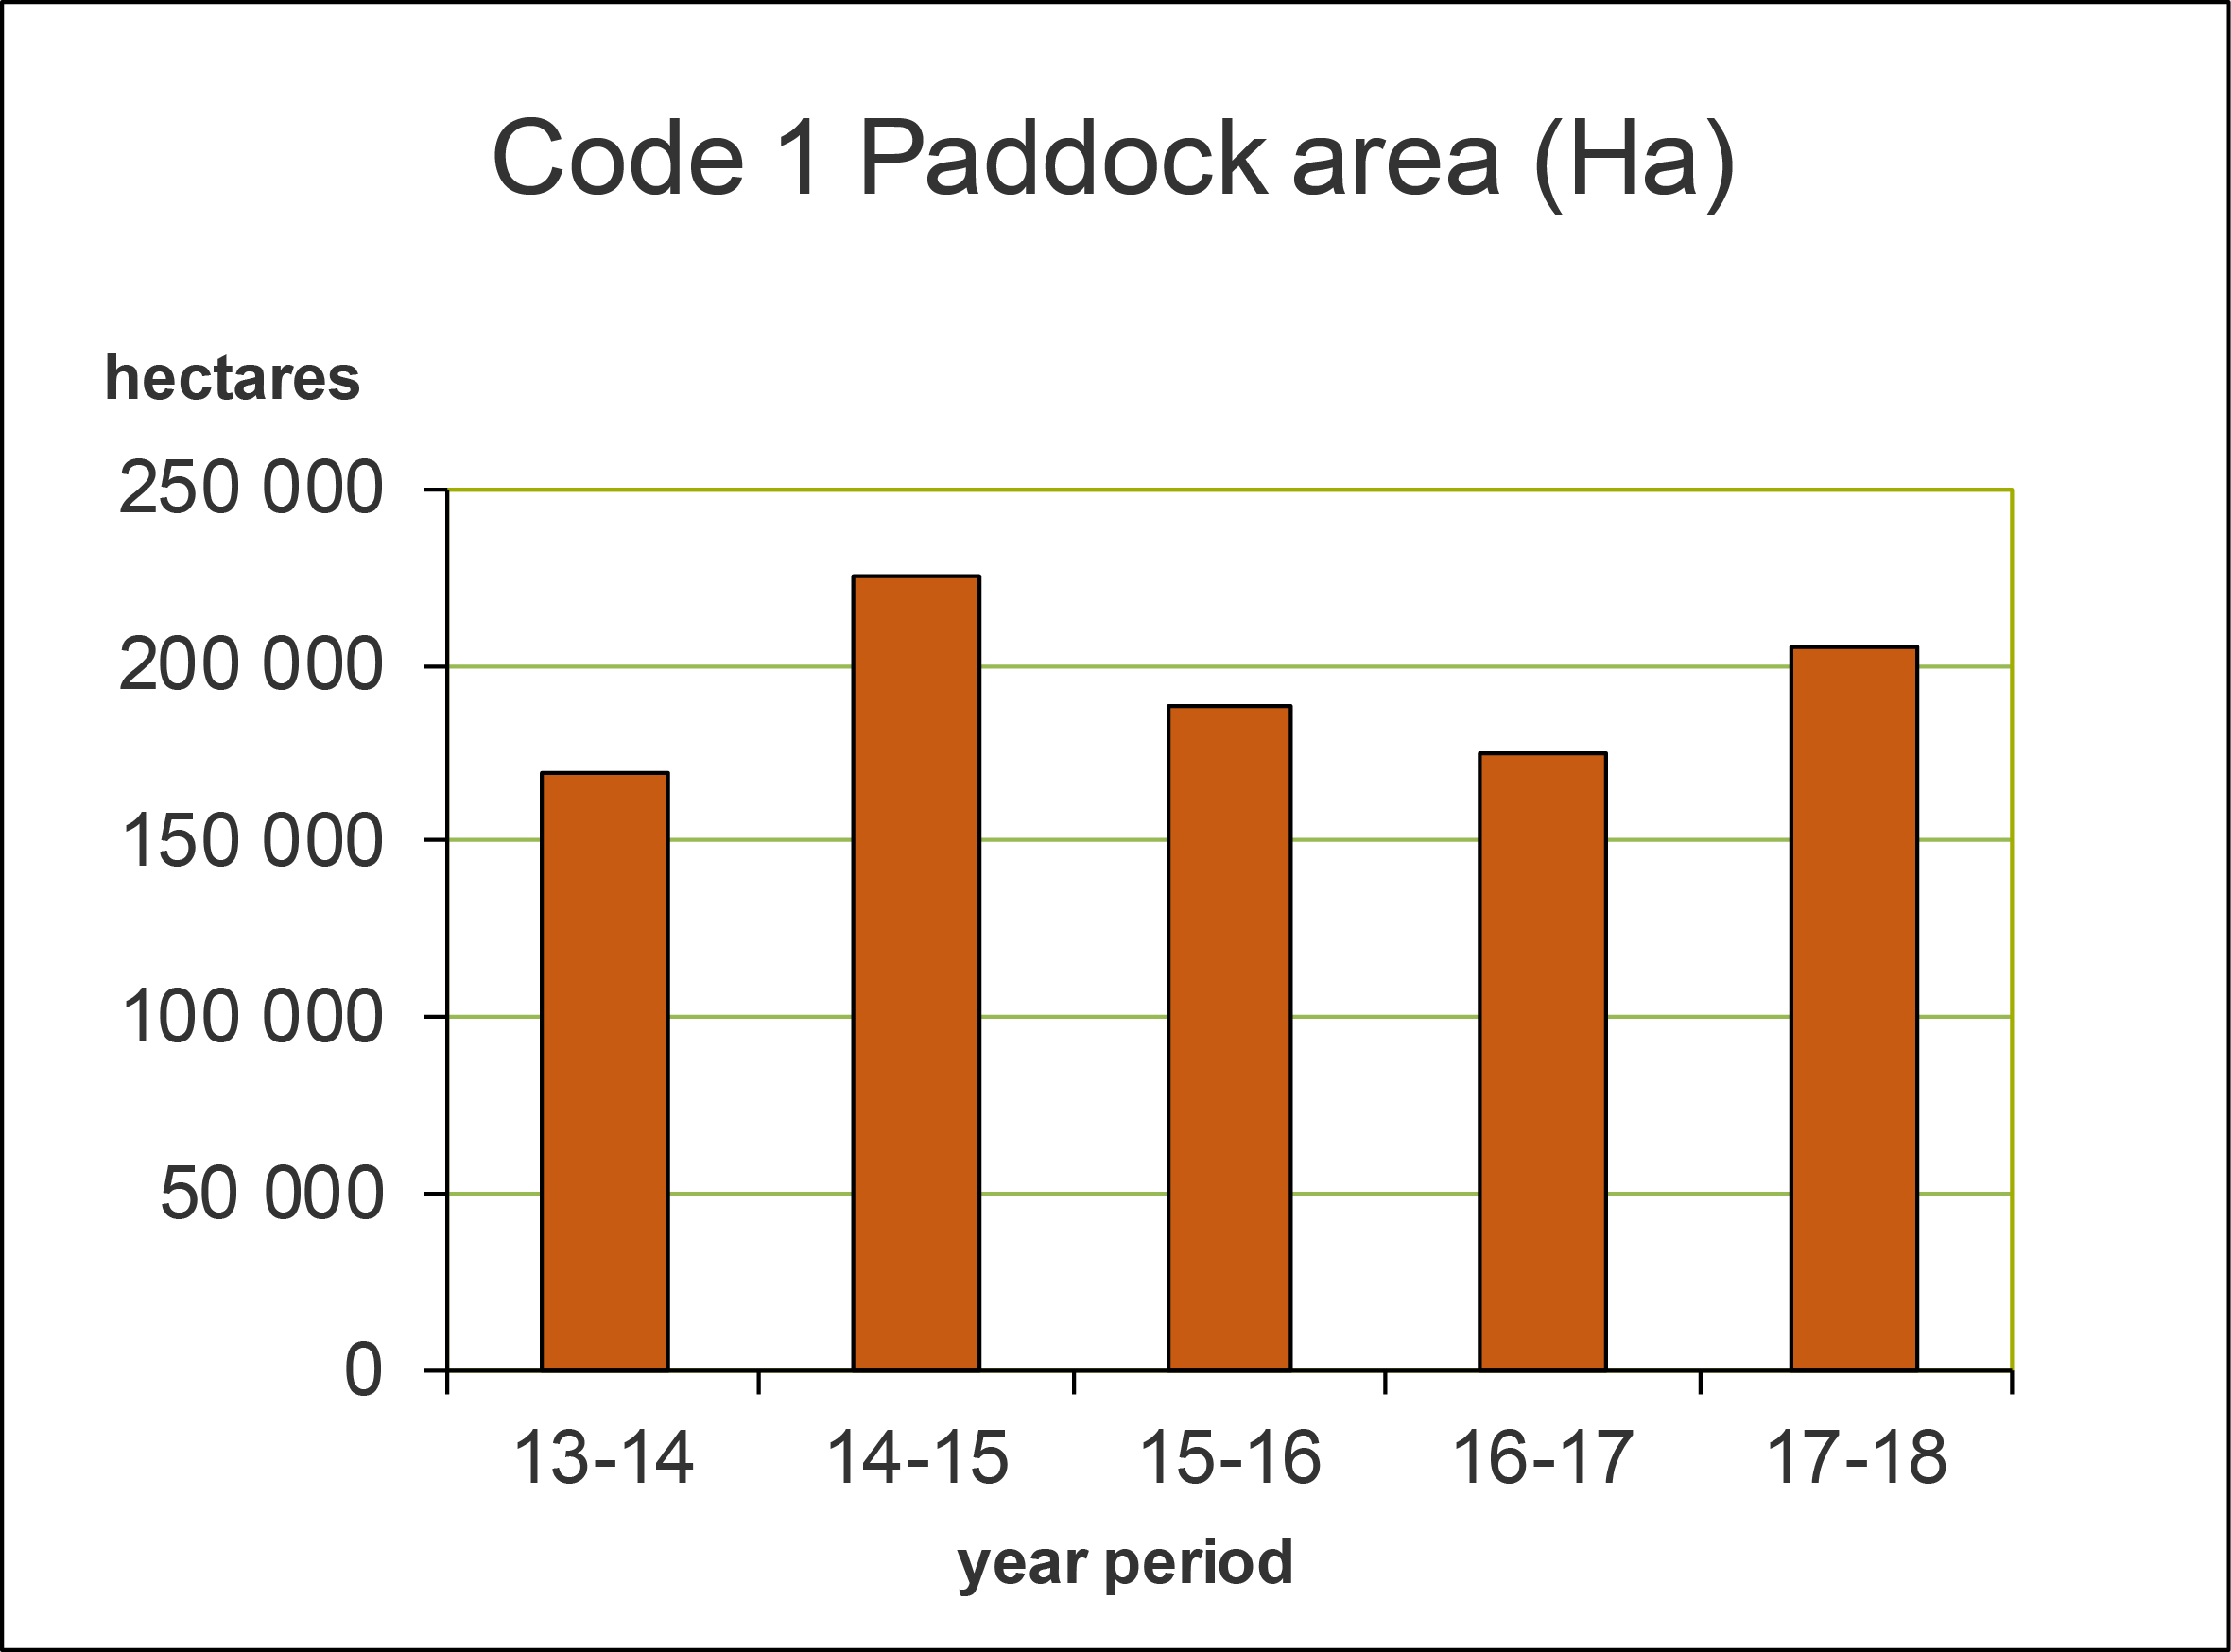 Are od Code 1 paddocks searched by the Program over the last five years